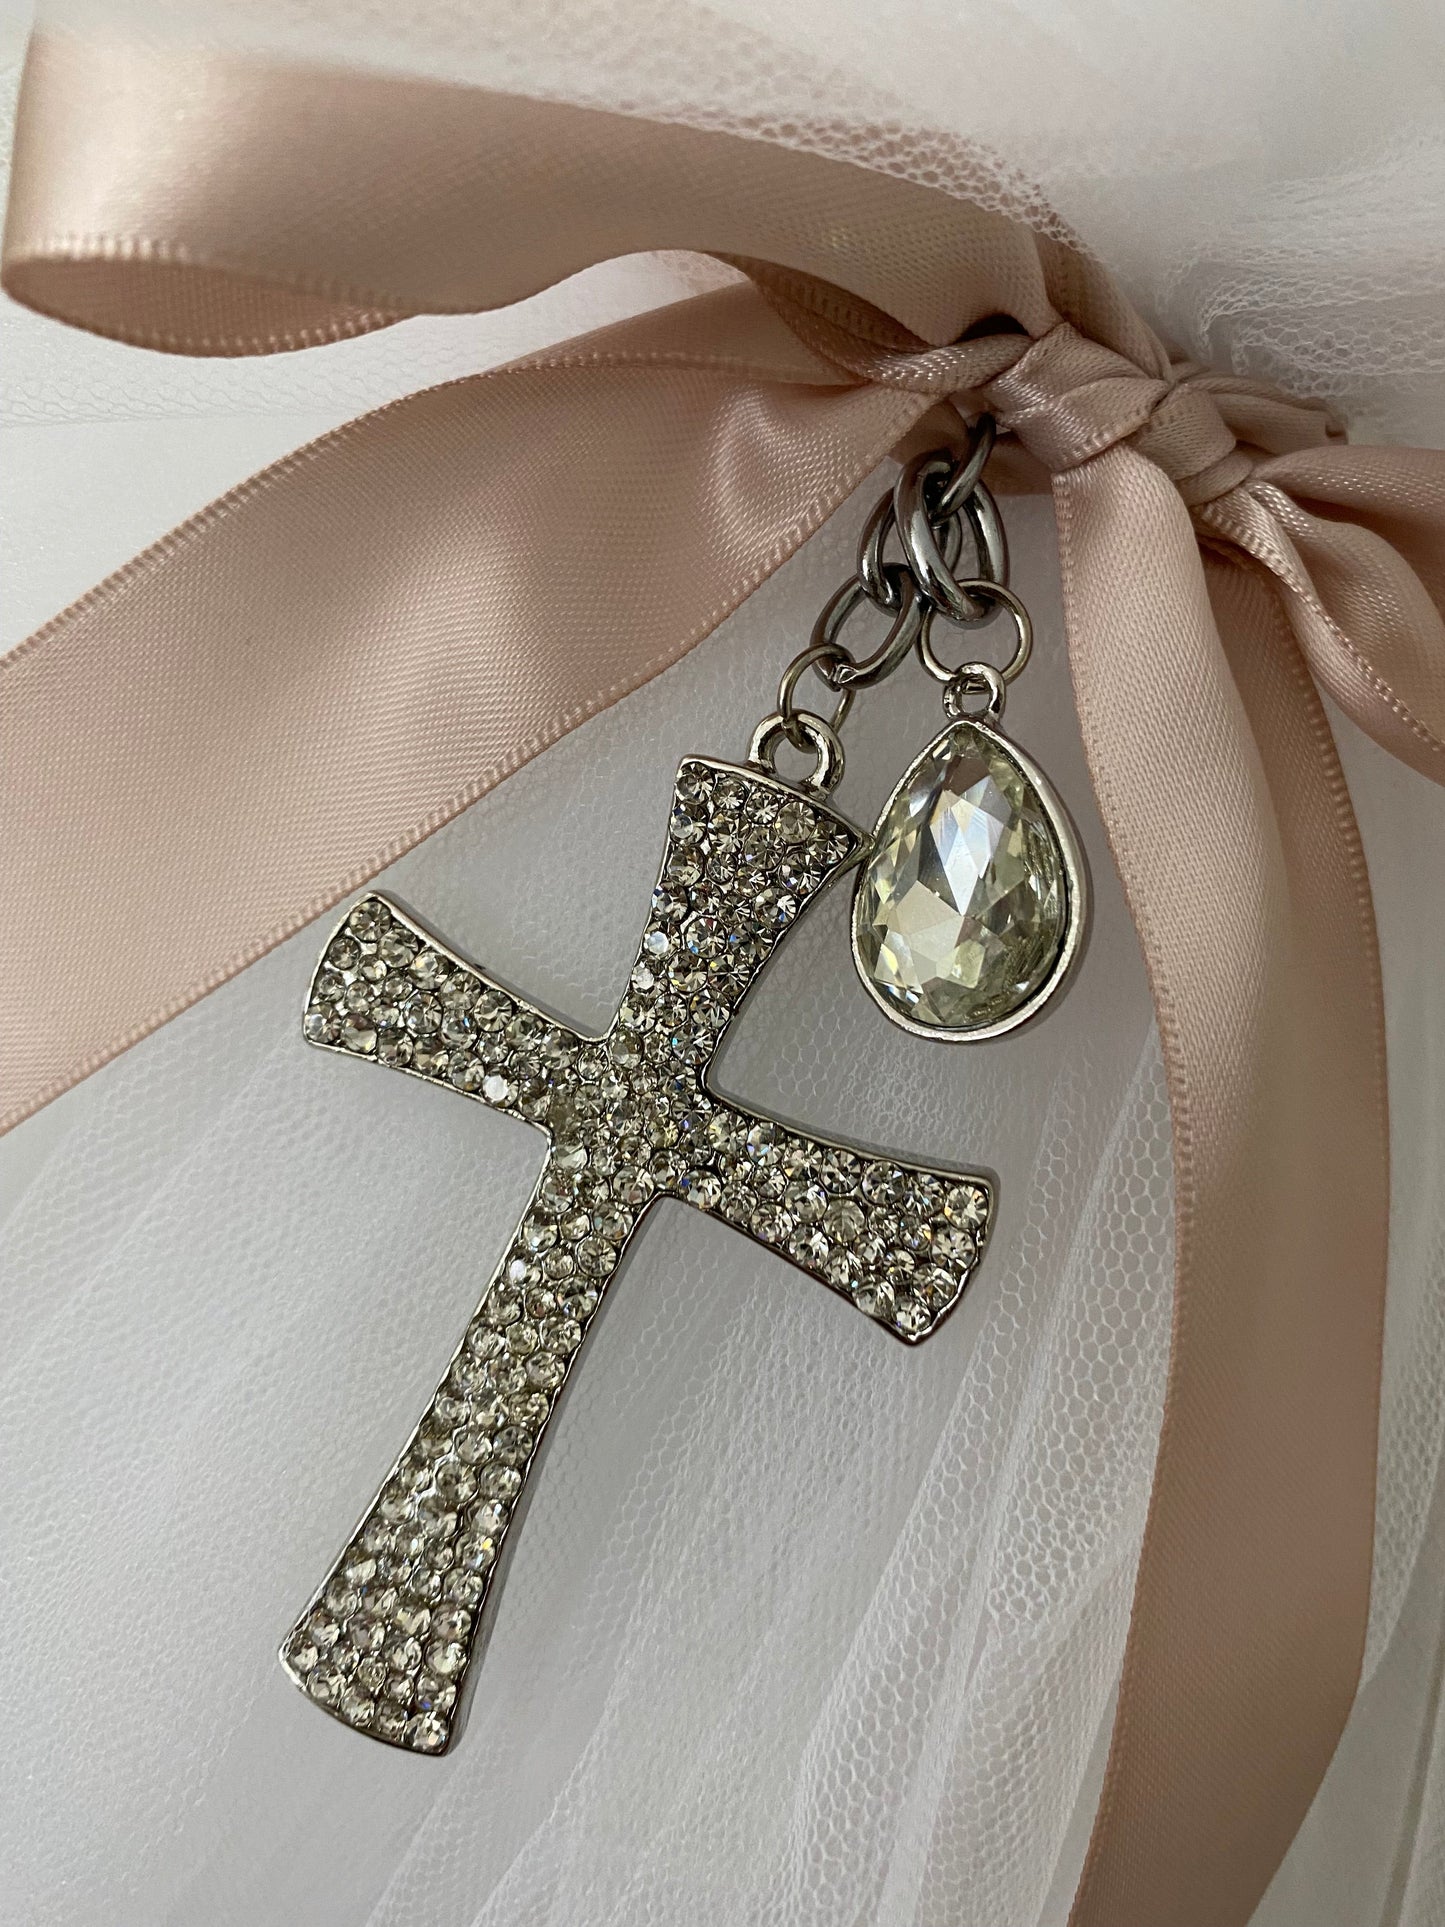 Orthodox Christening Candle - Crystal Cross - 3